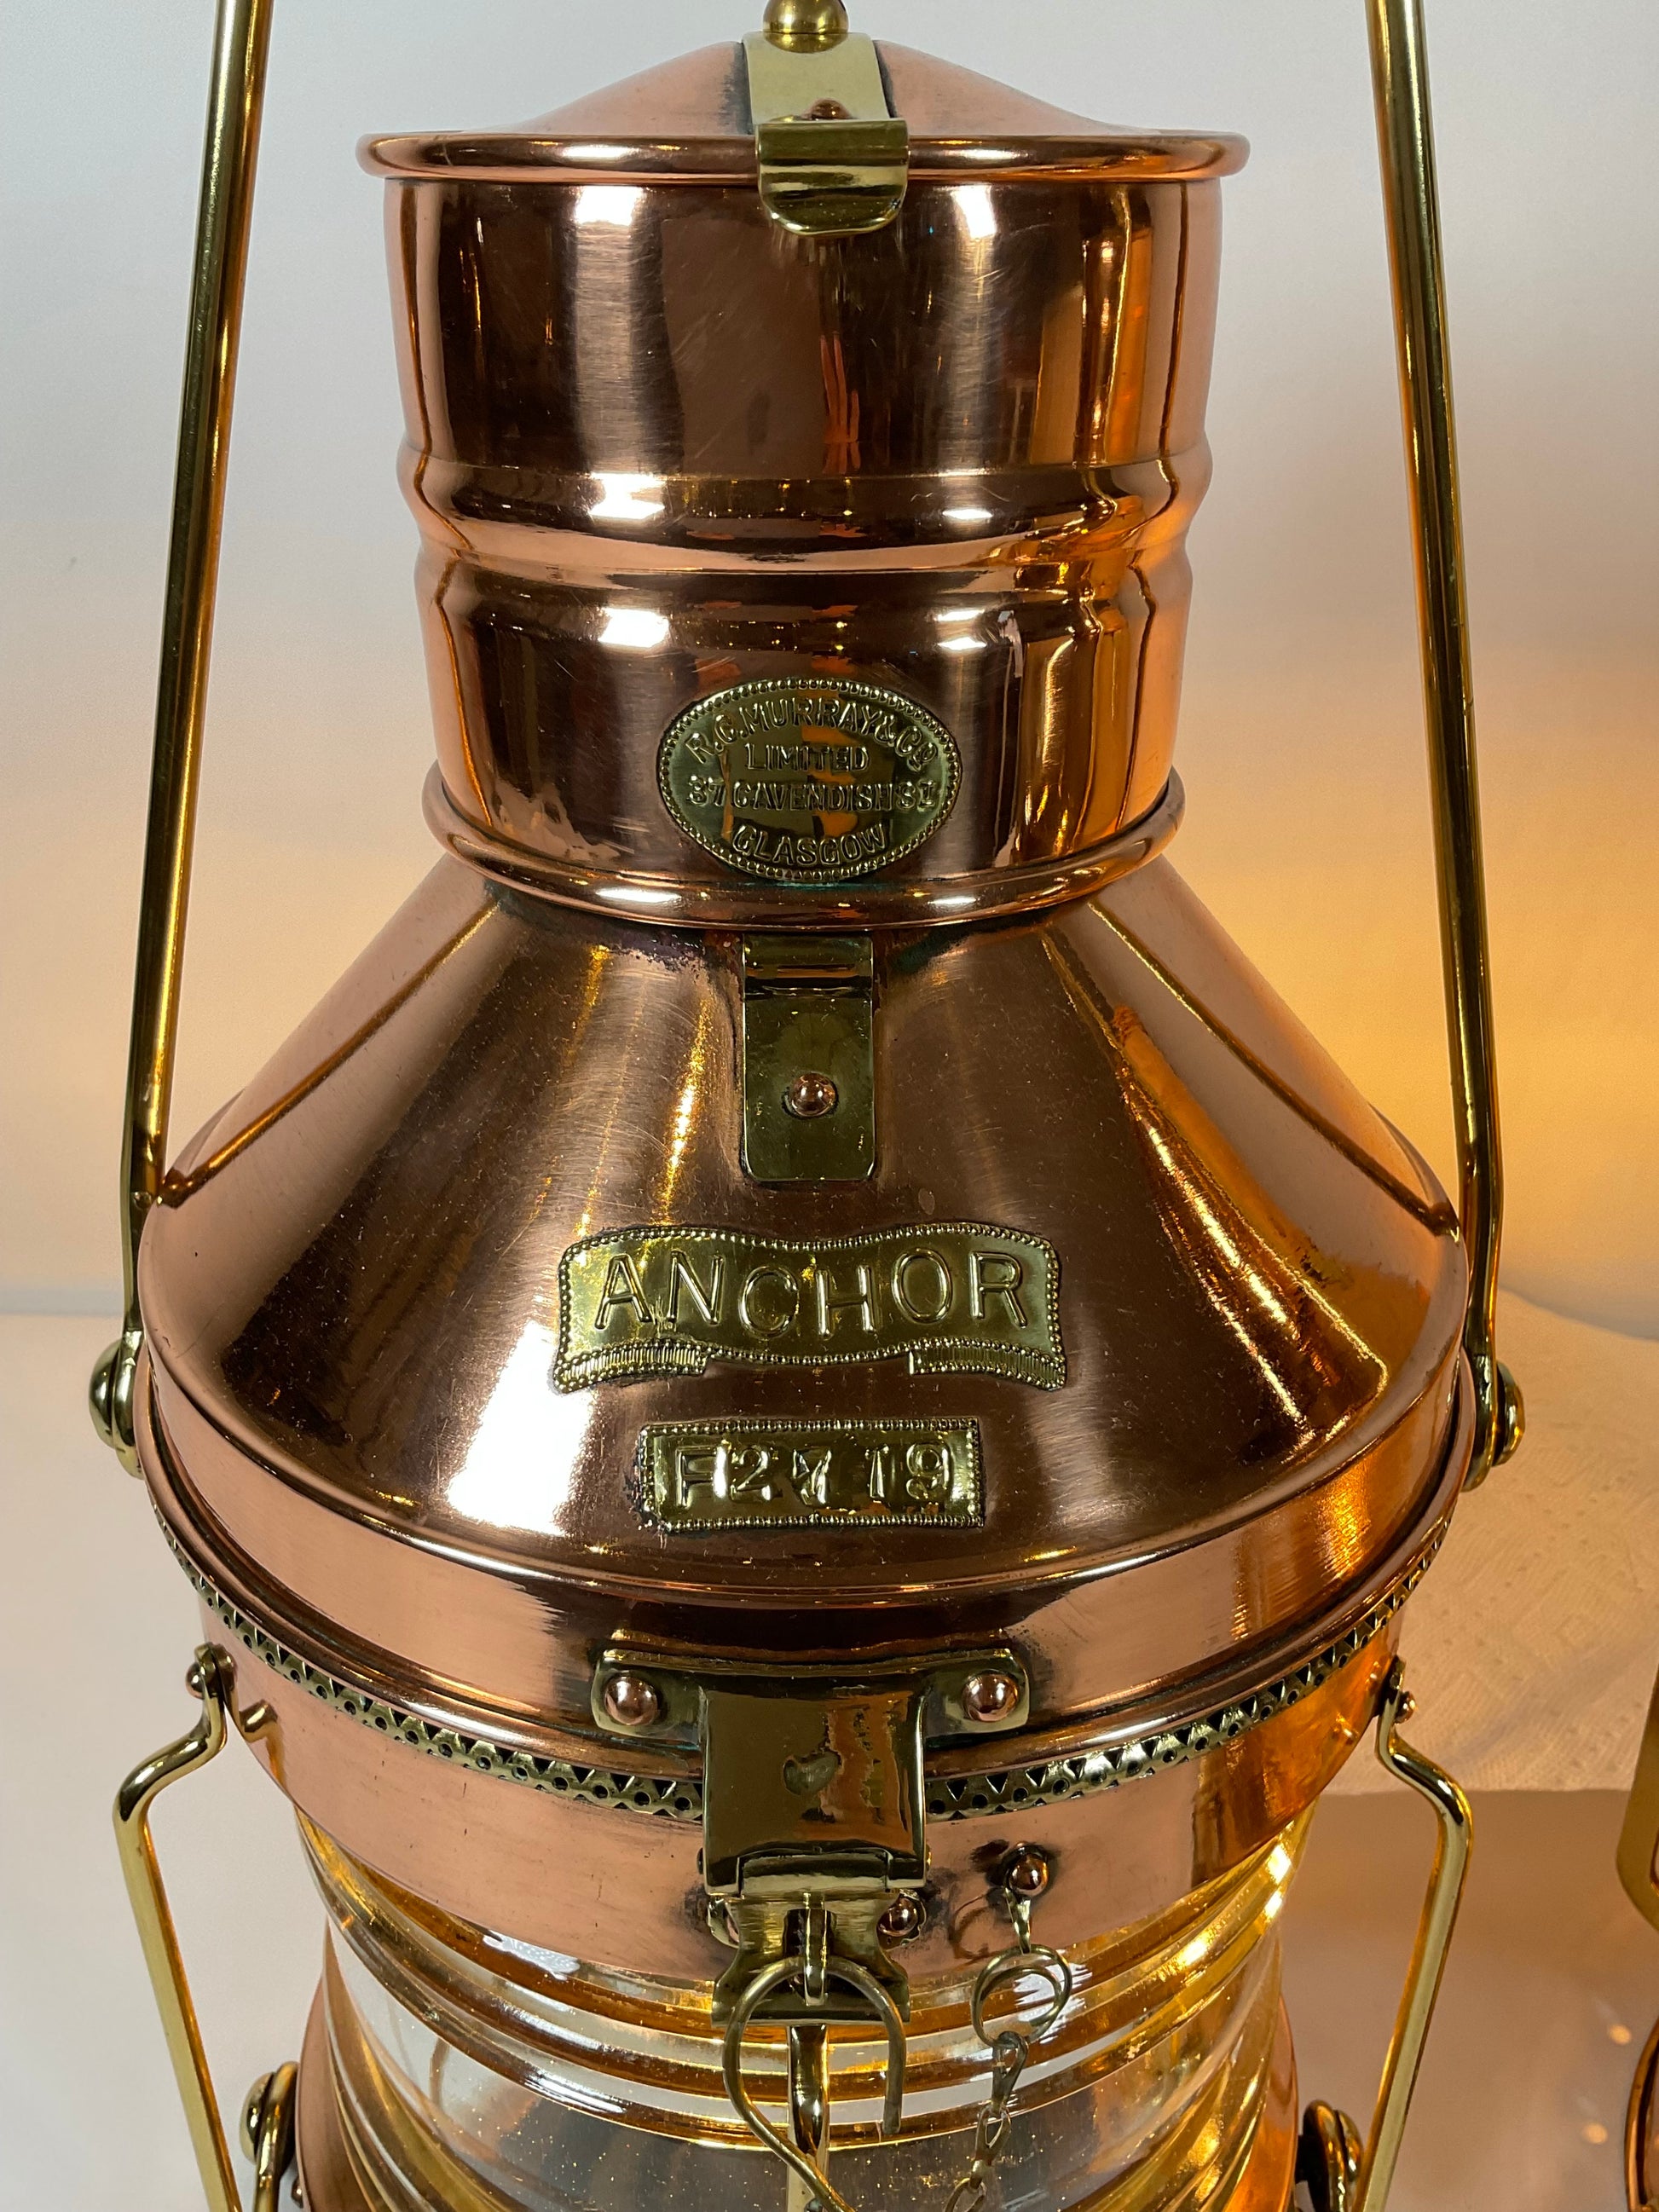 Two Copper and Brass Ship’s Lanterns - Lannan Gallery